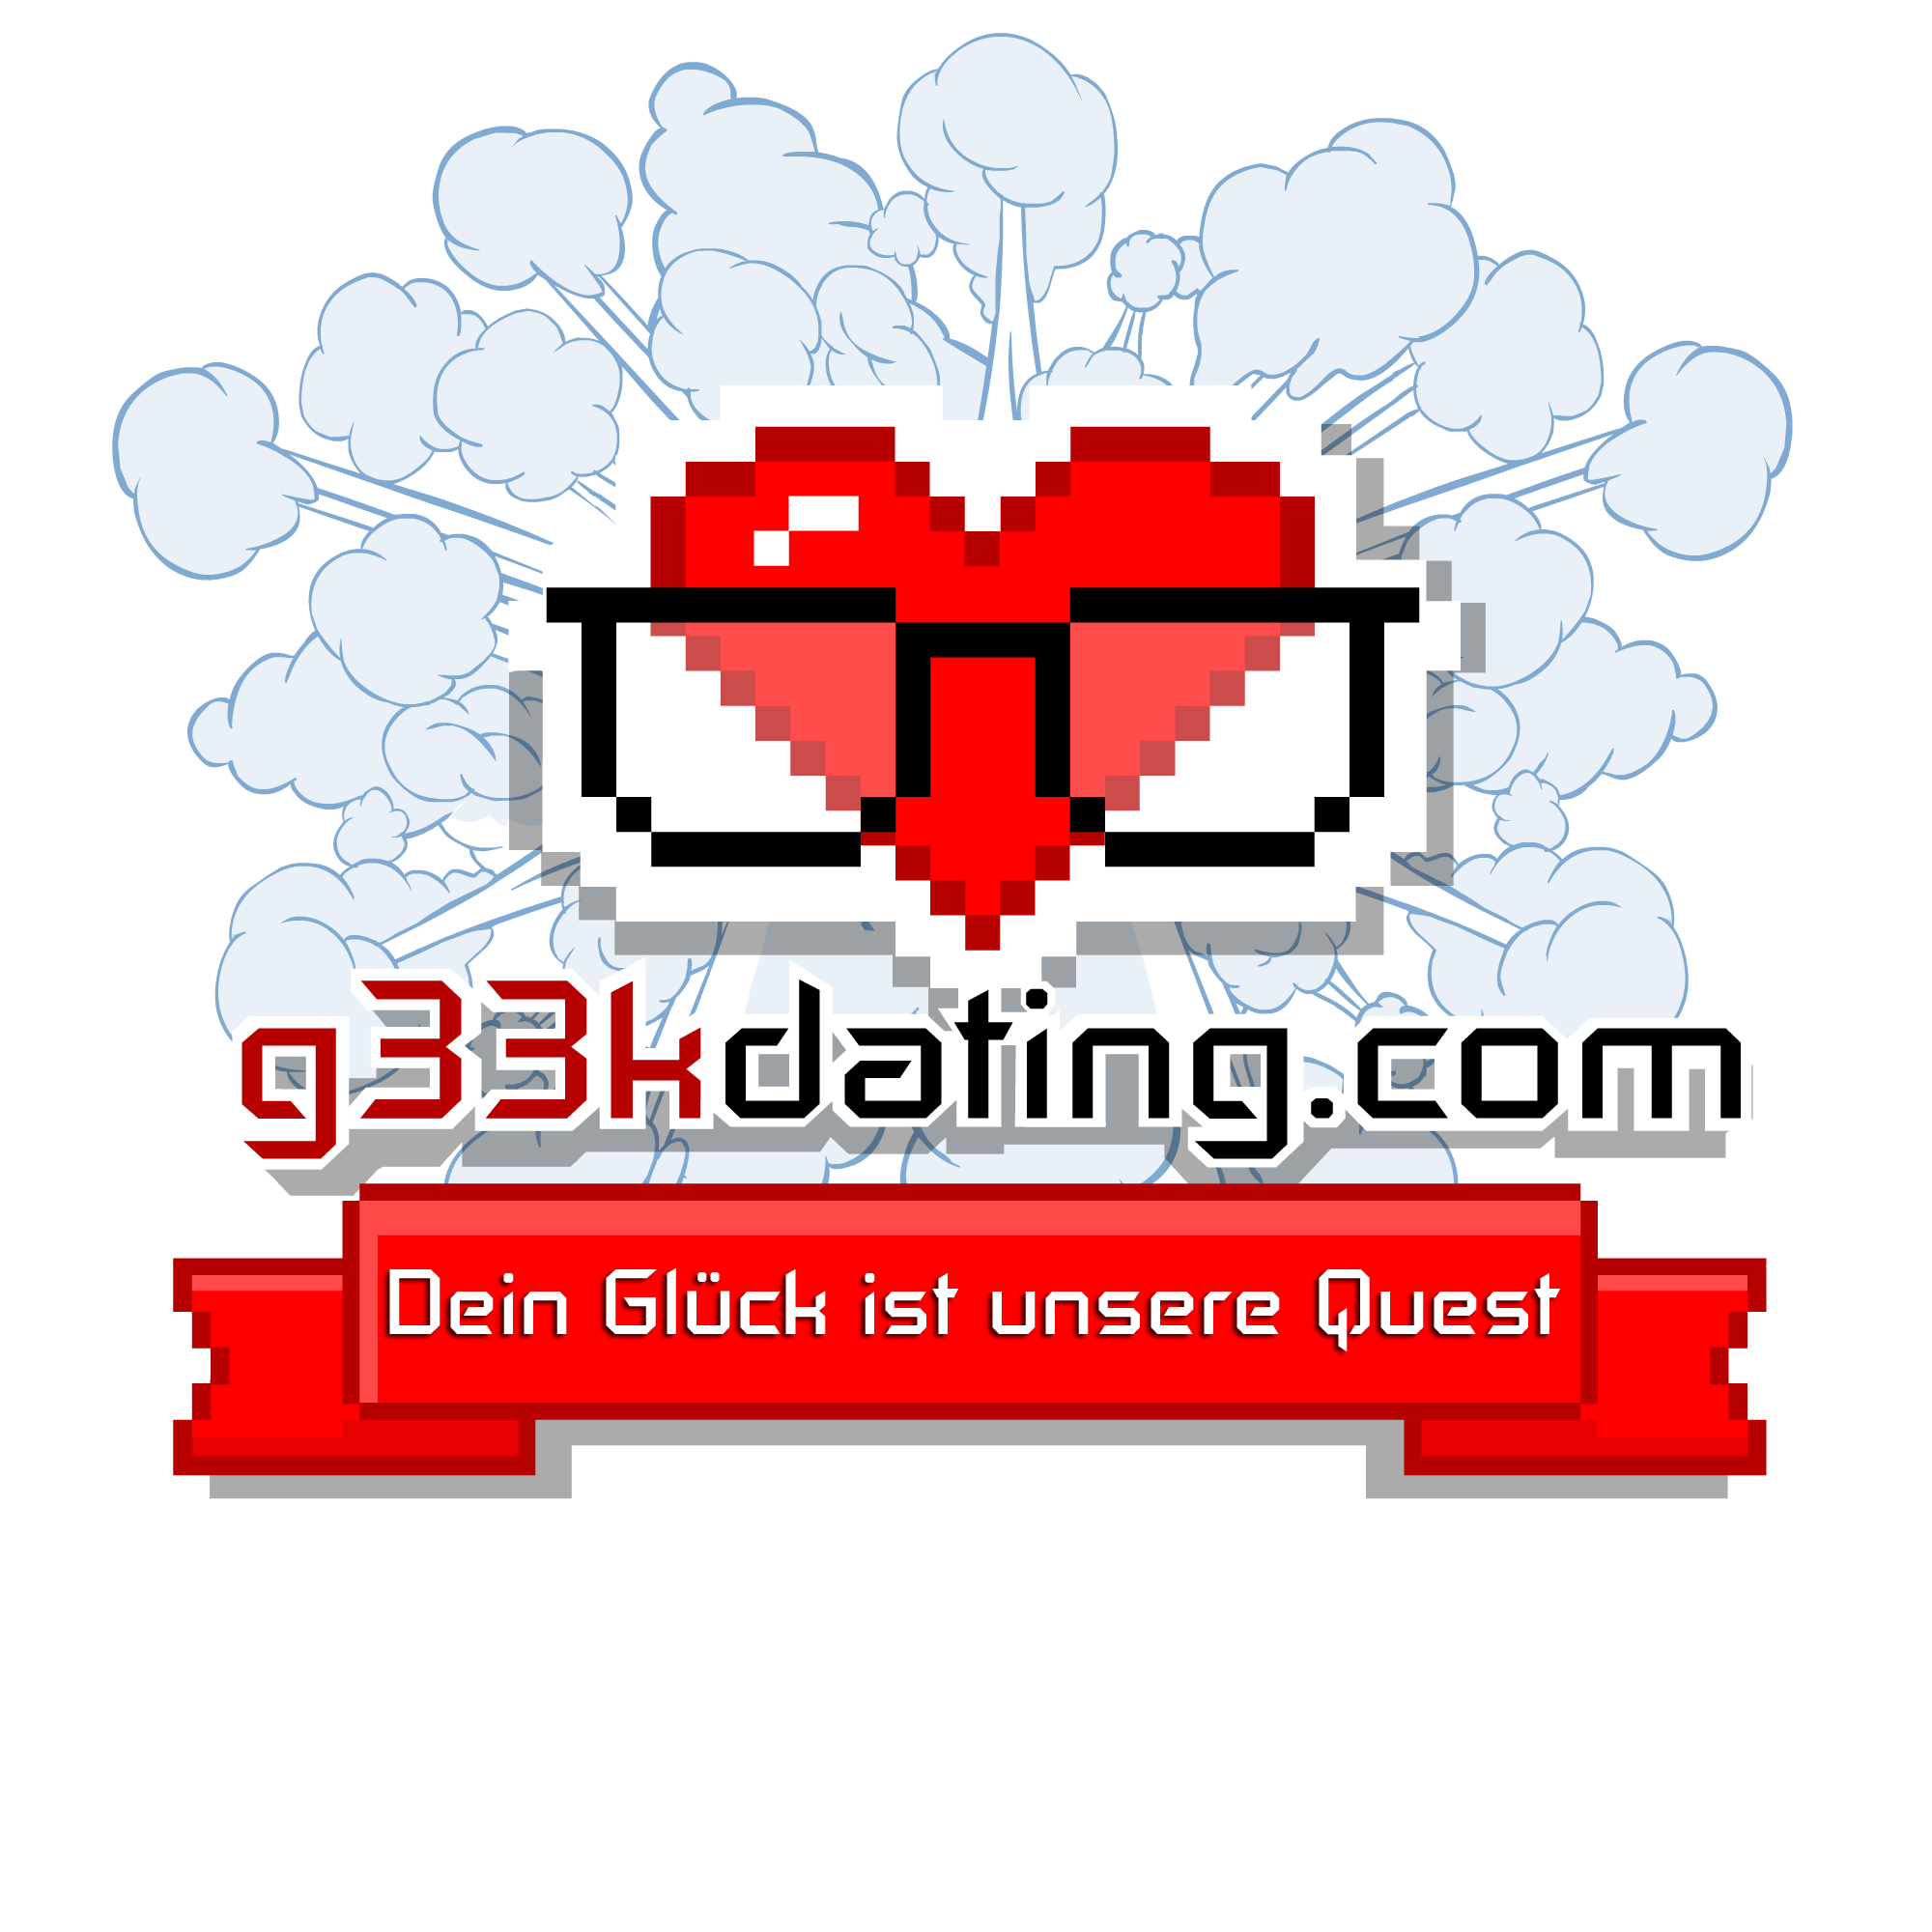 Best dating site for 2013 - online dating sites rules